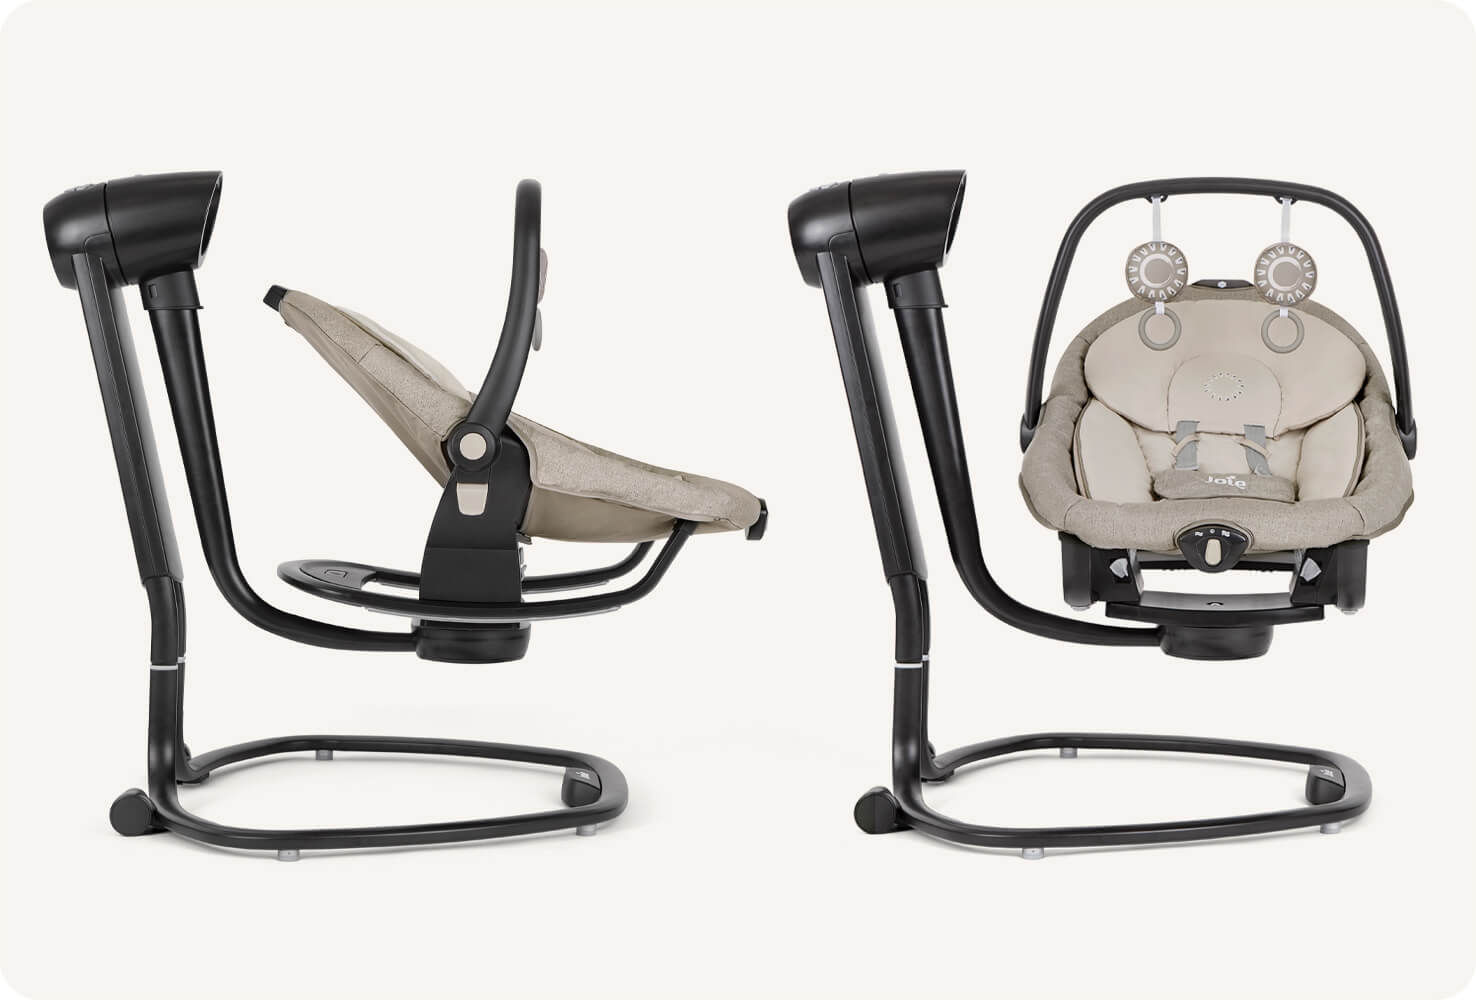 black frame and two tone tan seat pad  Joie serina 2in1 swings side by side. One is a frontal view, and the other is a side profile of the swing.